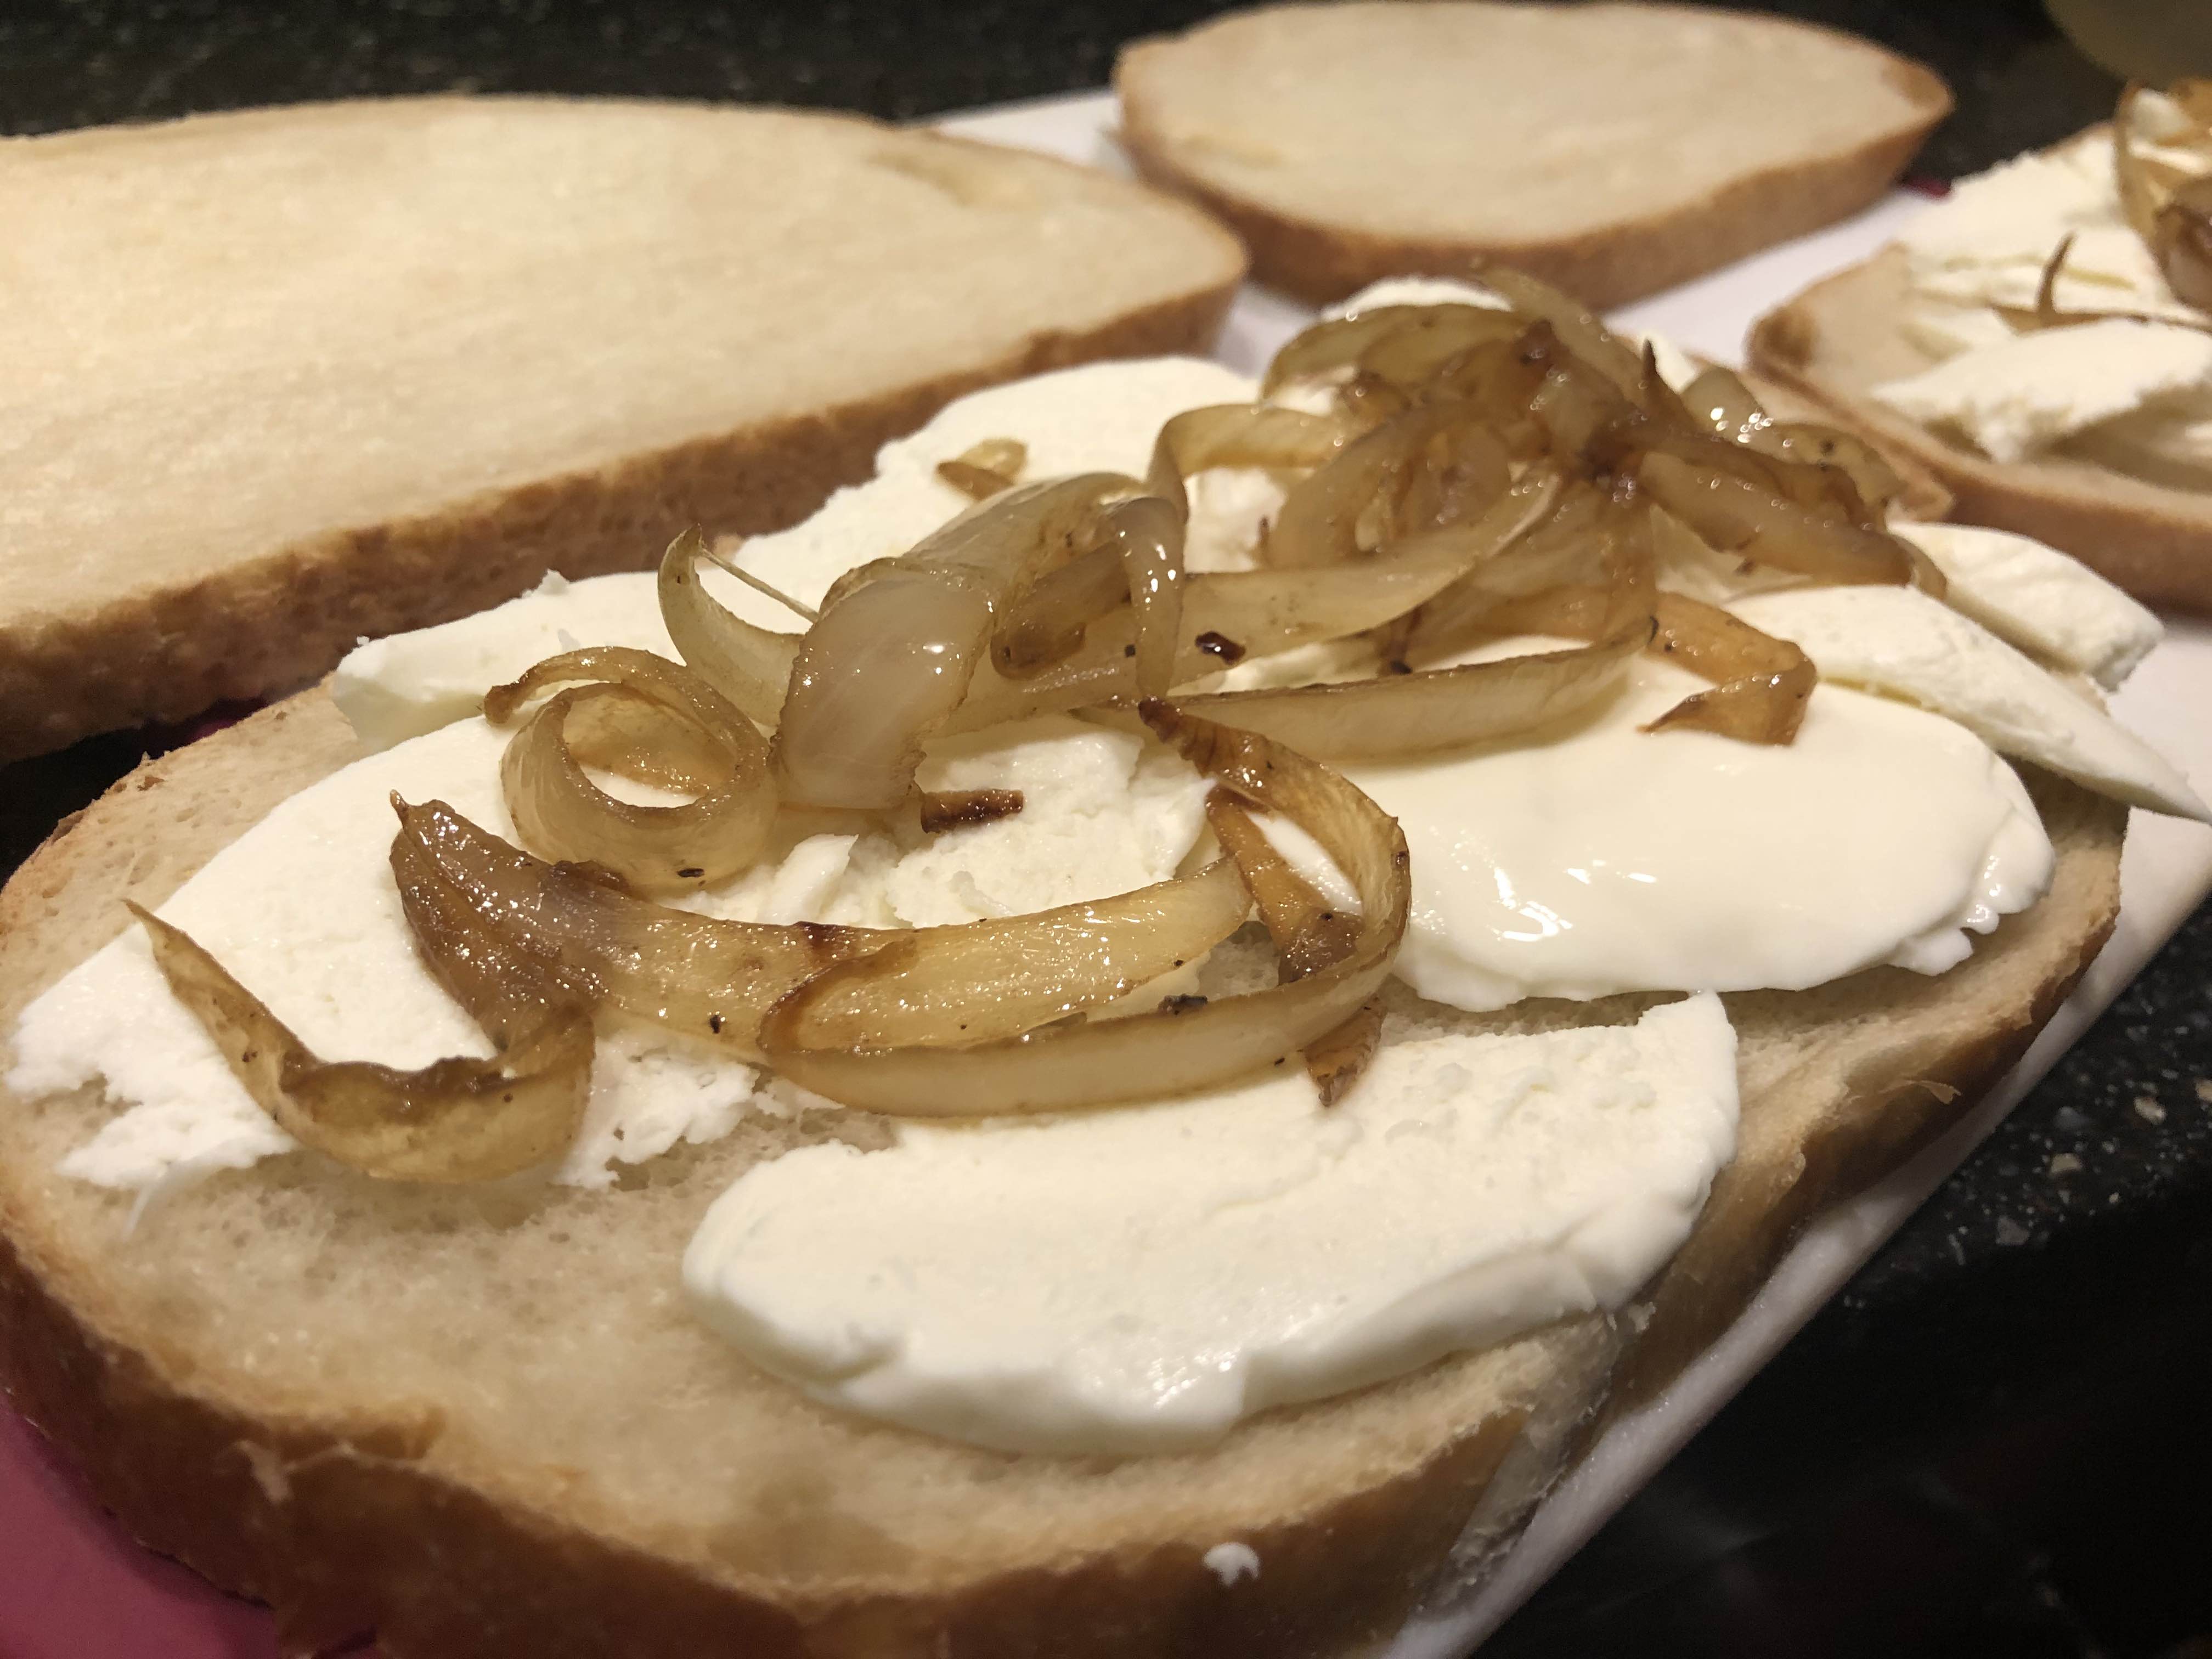 Construct, add cheese and onions to one slice of sourdough